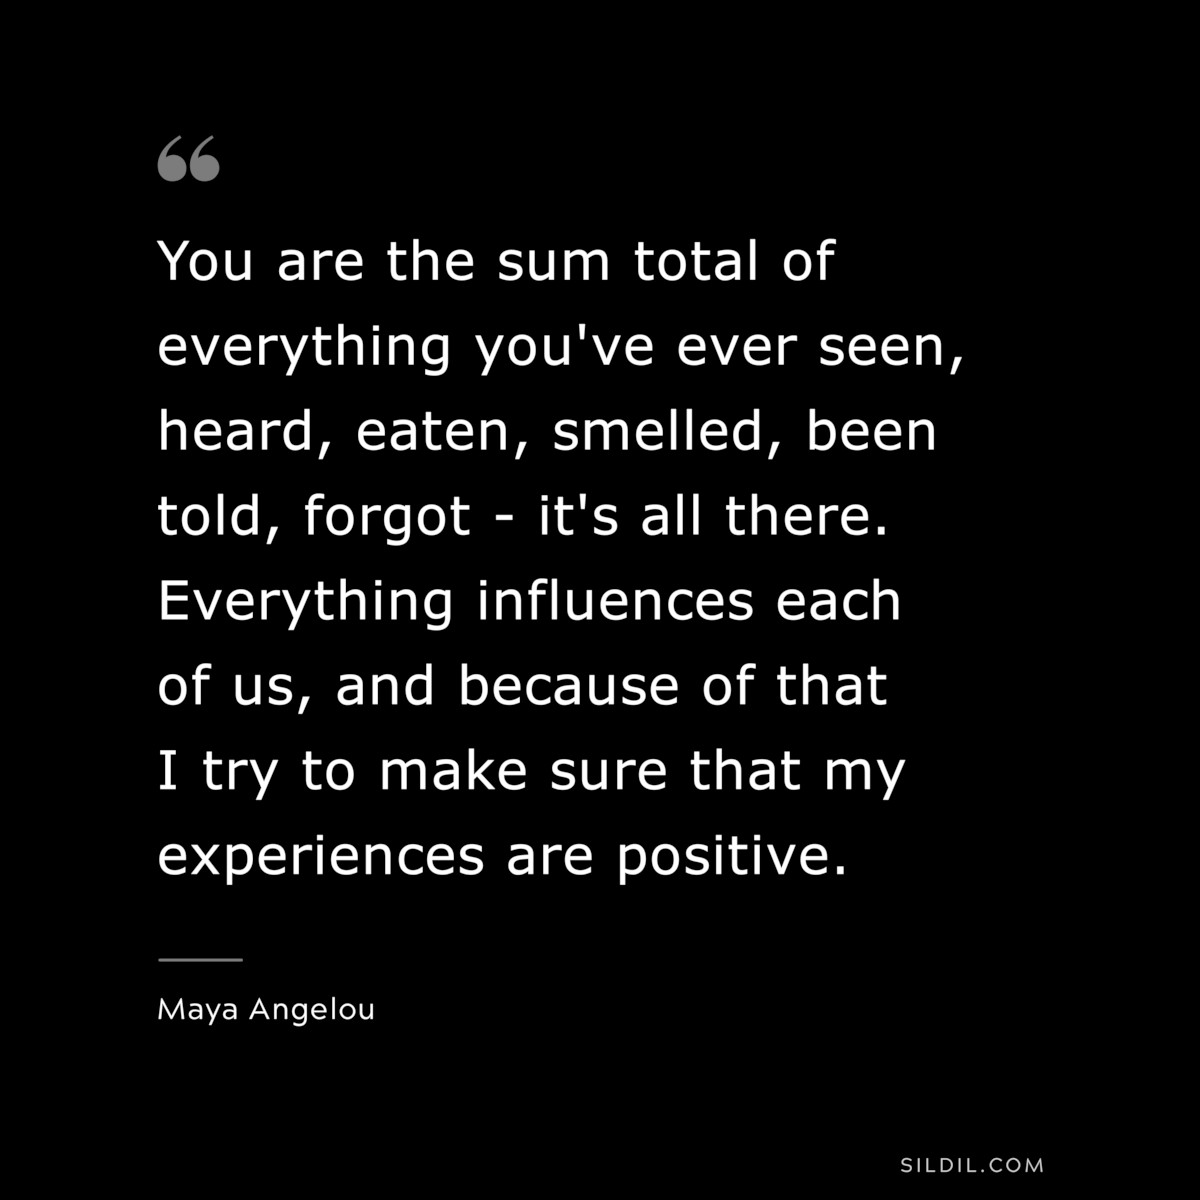 You are the sum total of everything you've ever seen, heard, eaten, smelled, been told, forgot - it's all there. Everything influences each of us, and because of that I try to make sure that my experiences are positive. ― Maya Angelou